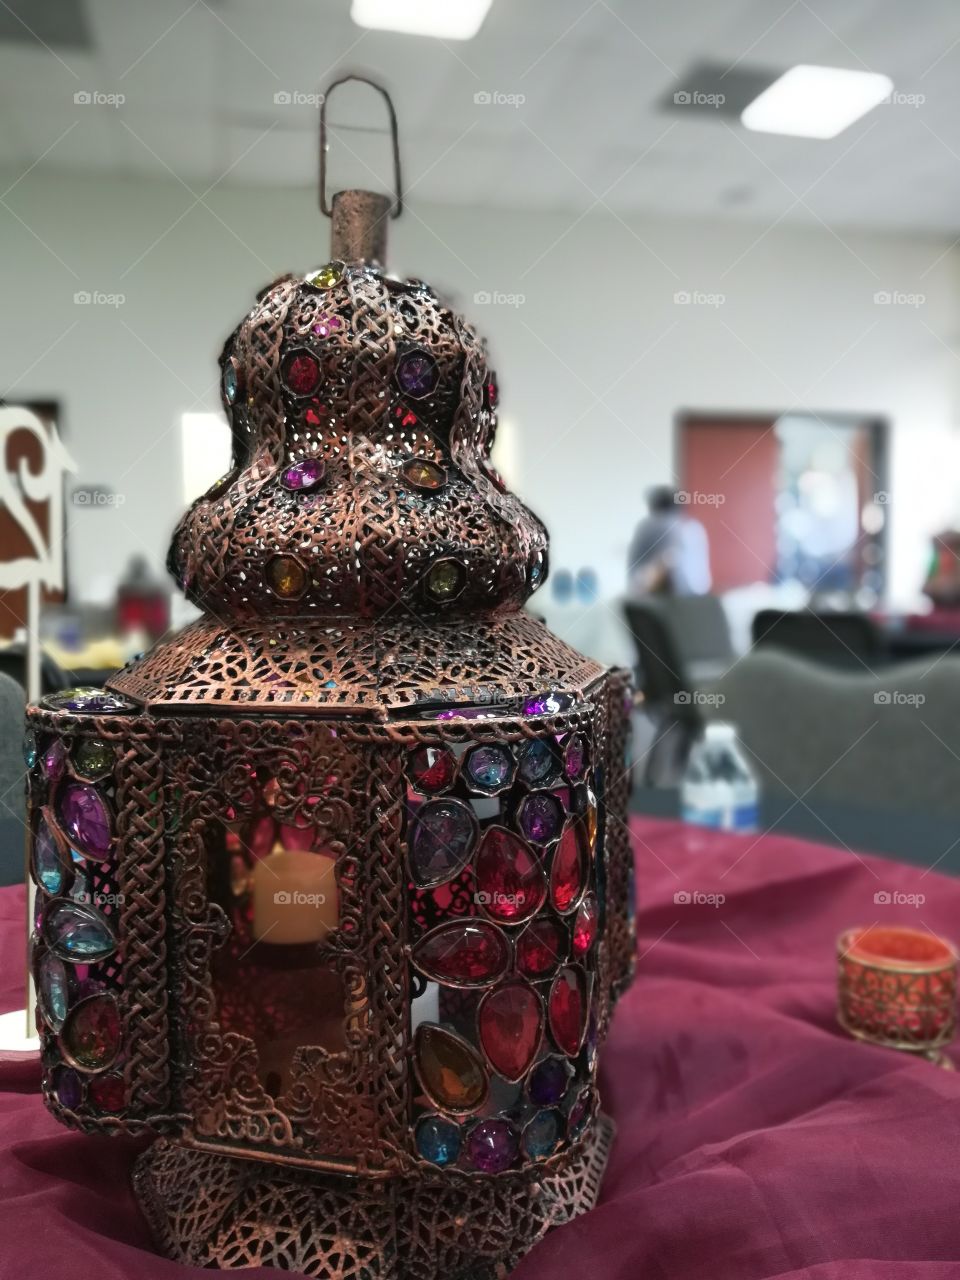 Elegant and colorful lantern used to brighten up any event, place, or even your house. The jewels glisten in the sun and the lights shine from within.